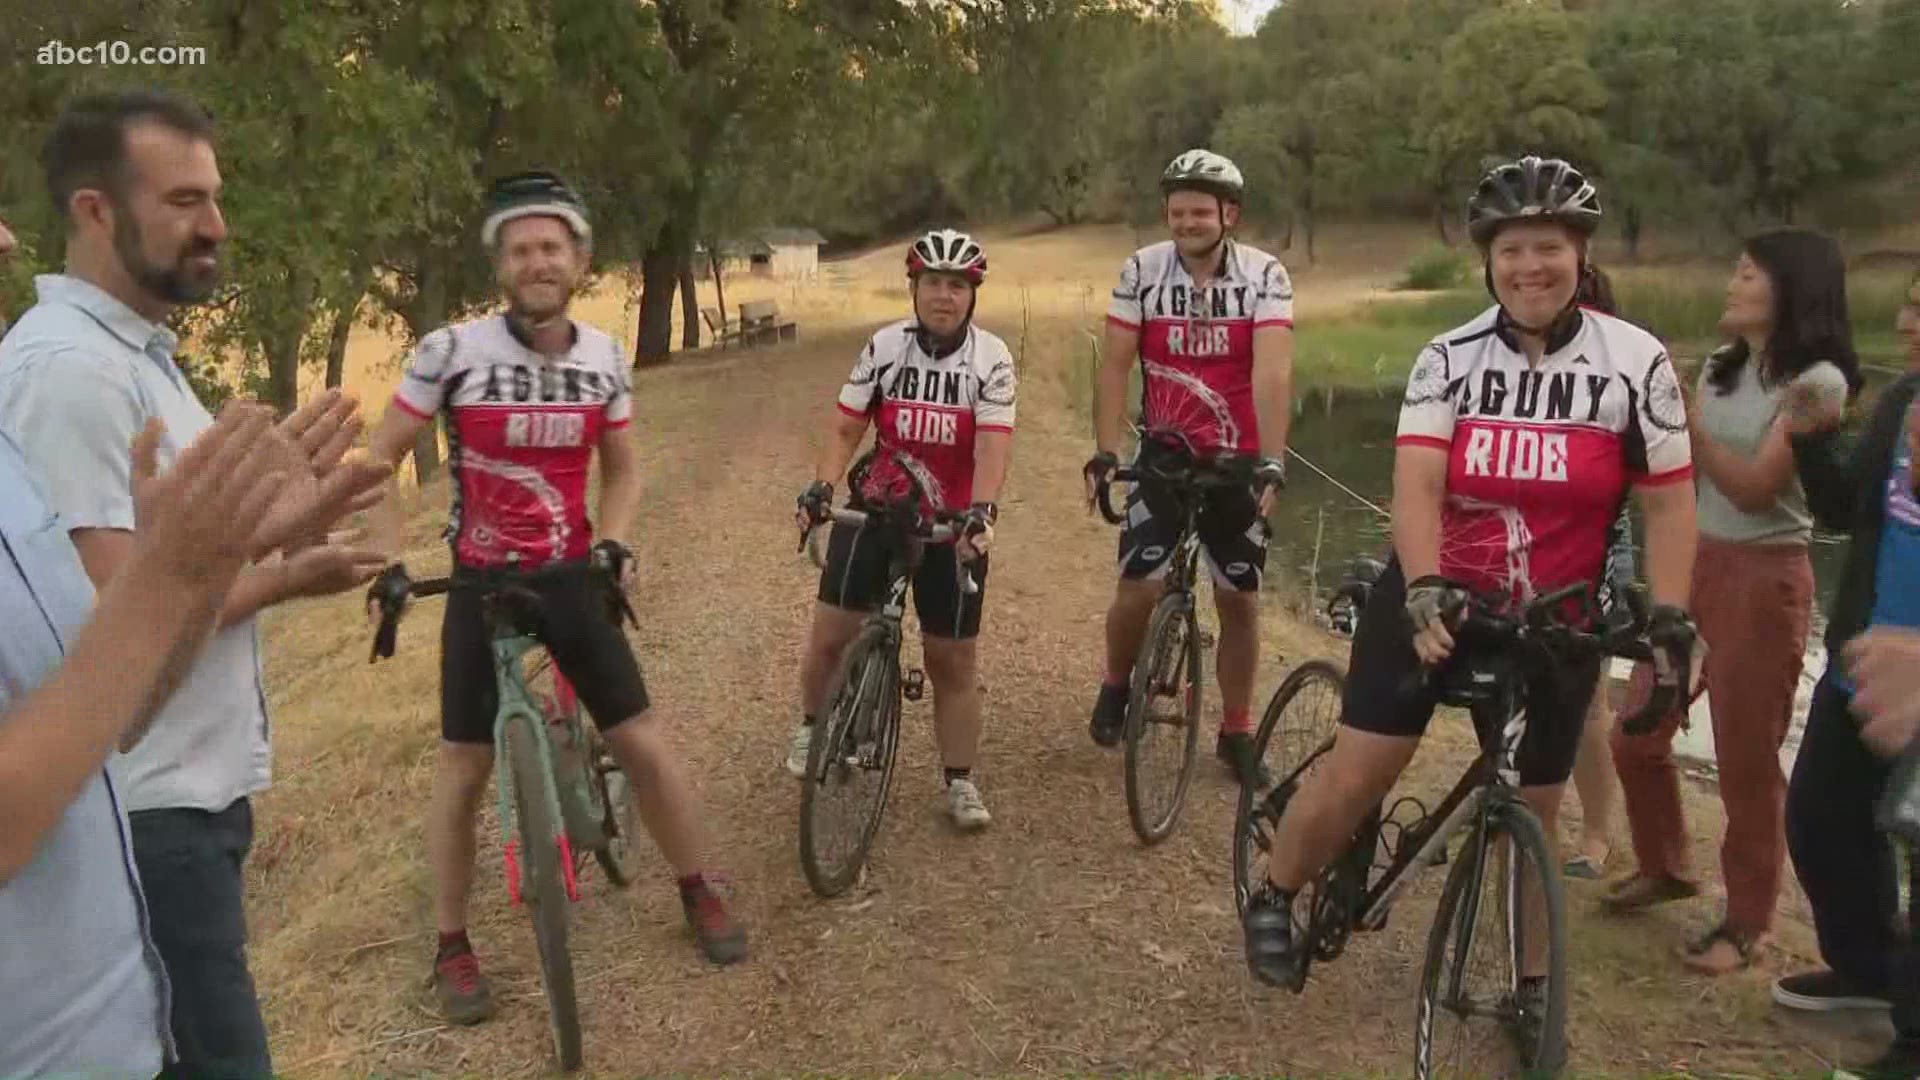 The Agony Ride could end with someone riding 400 miles. The 24-hour bike-a-thon raises funds for the Christian Encounter Ranch.